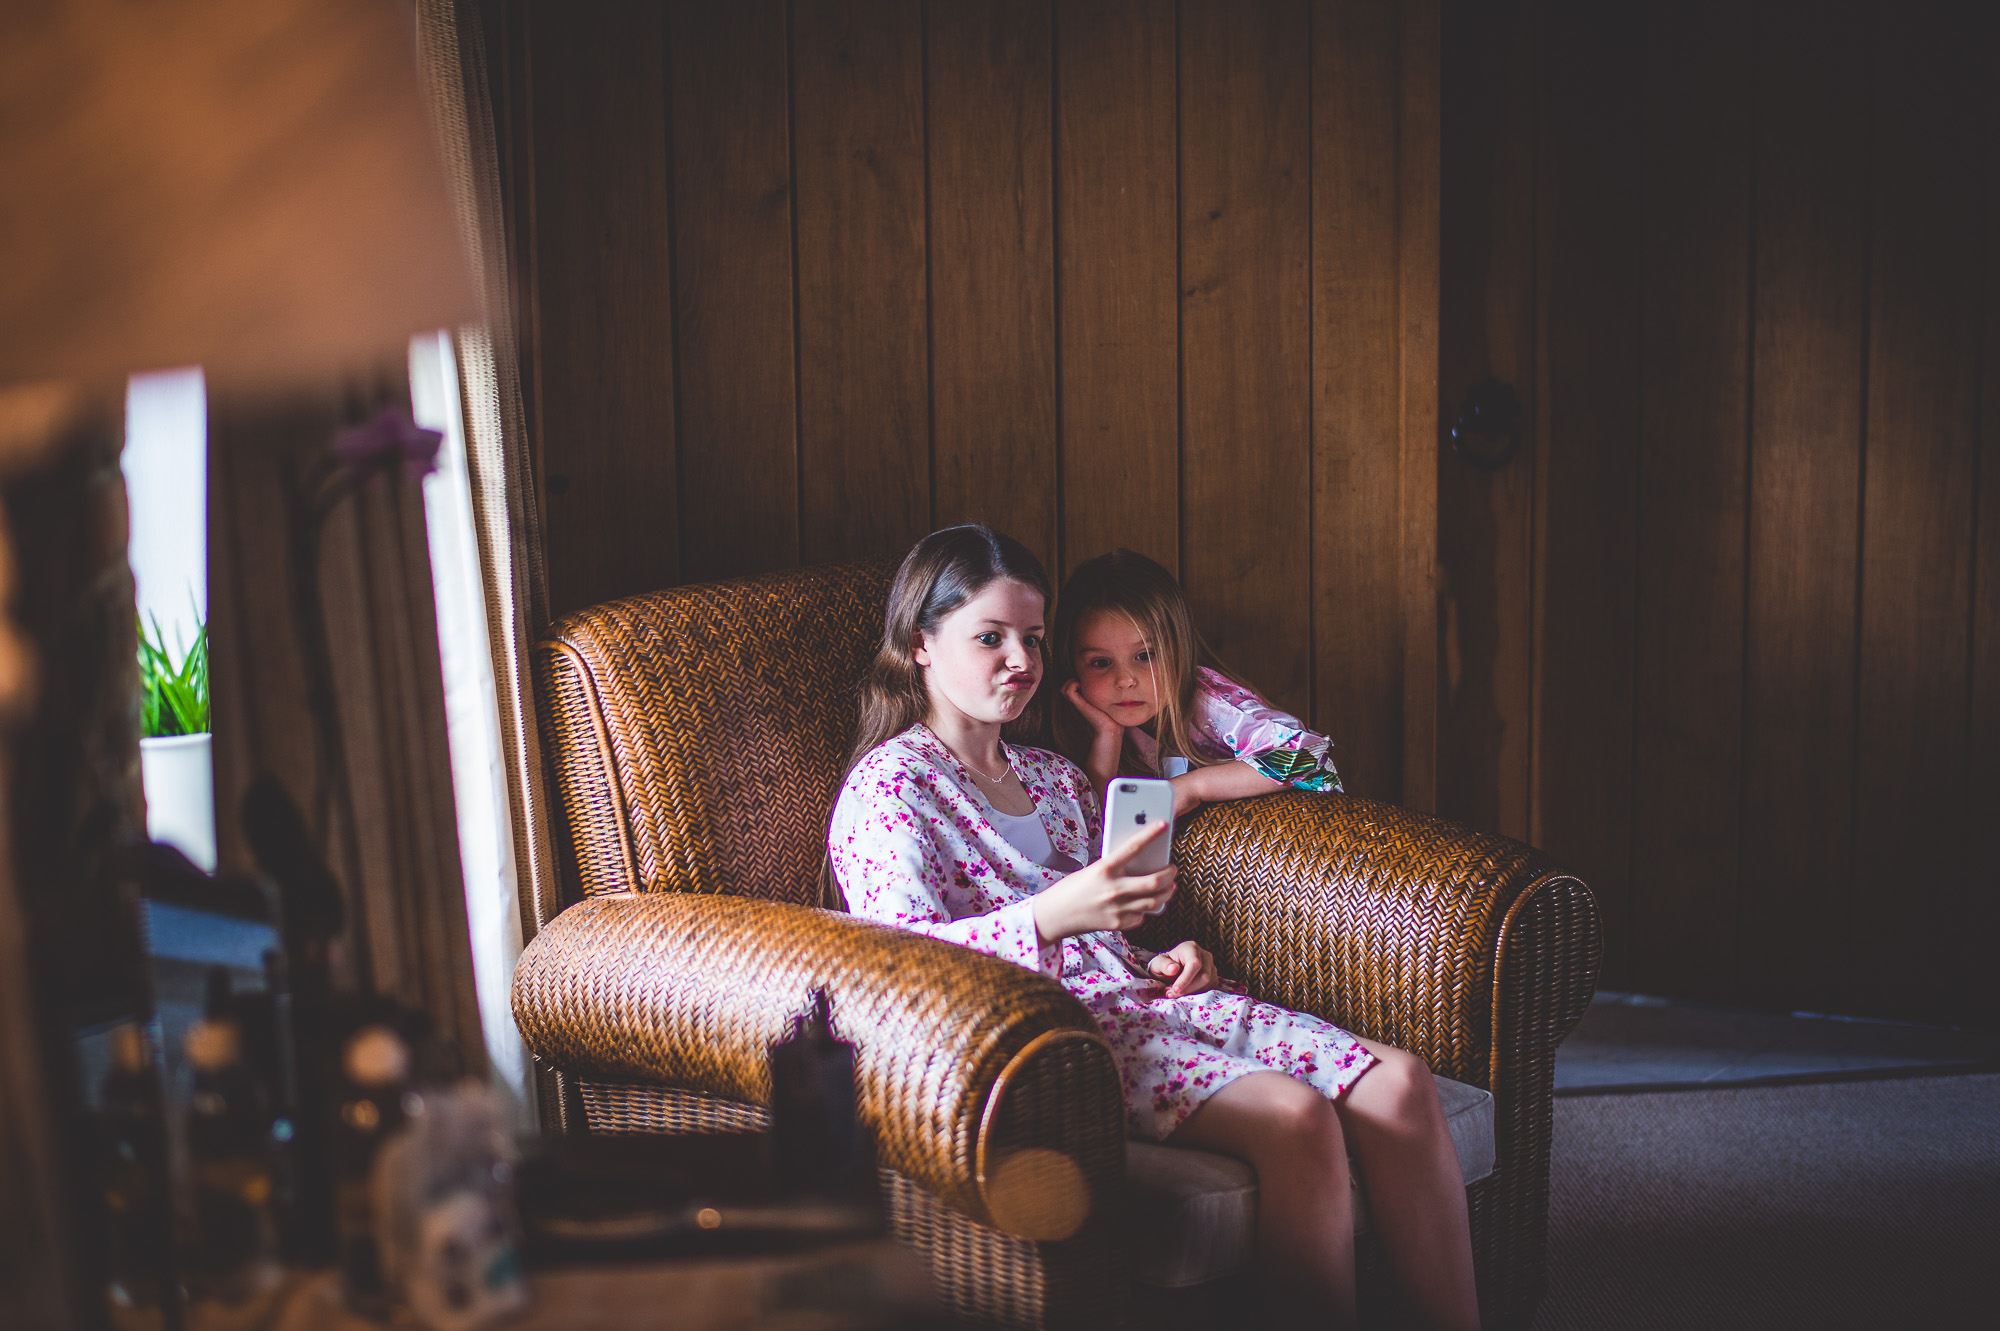 Two girls posing for a wedding photo with a cell phone, captured by a wedding photographer.